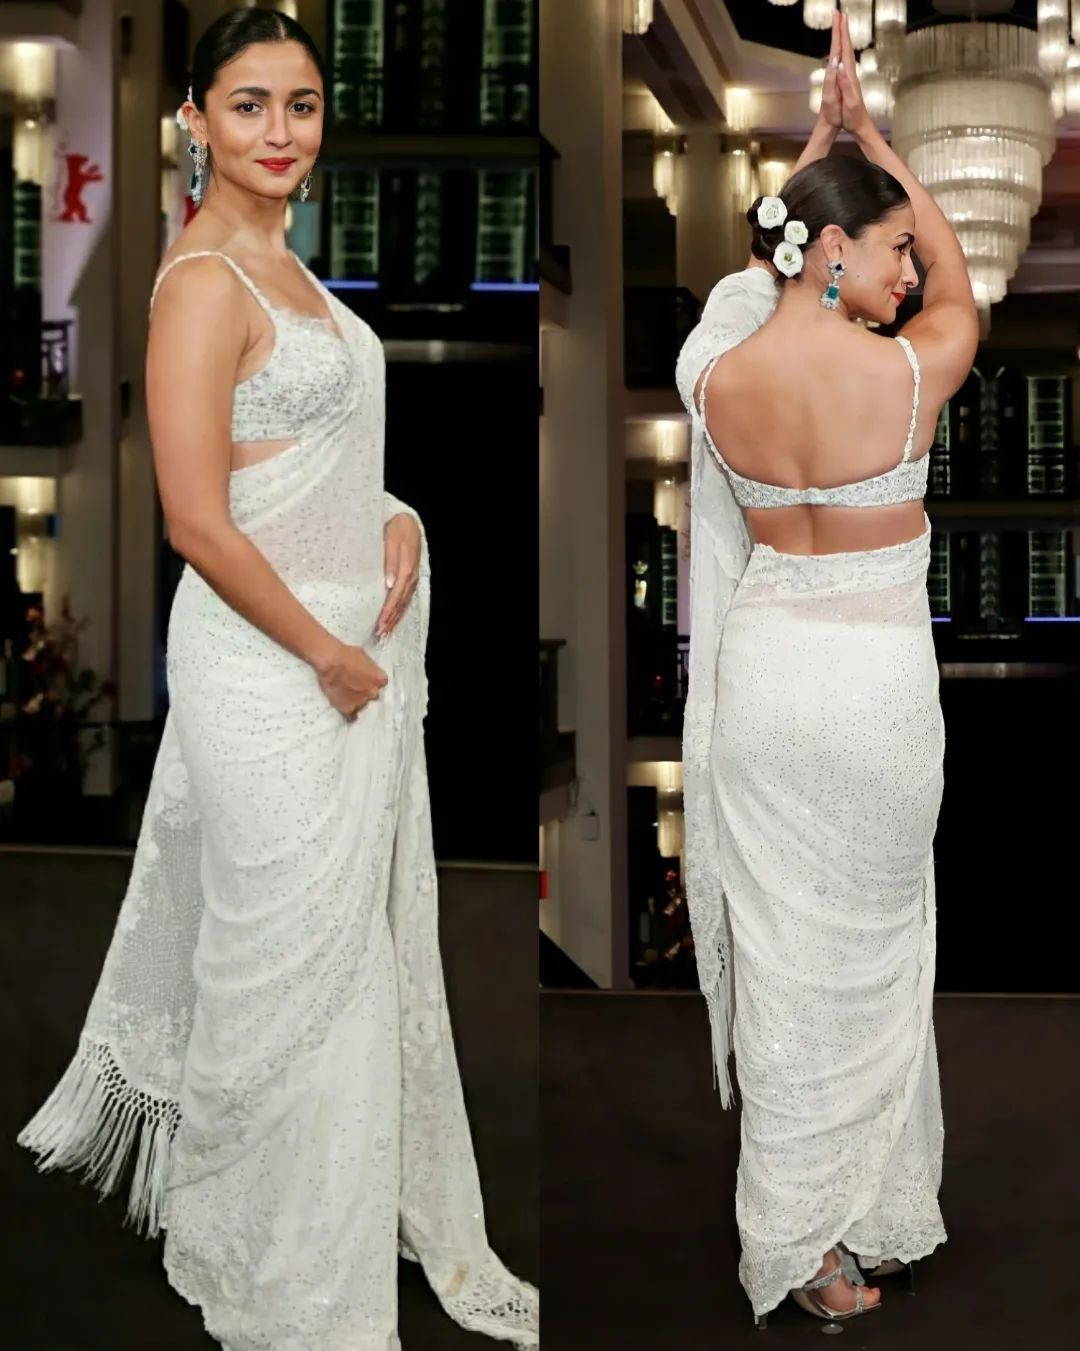 Dressed in a bespoke, Rimple & Harpreet White Couture Saree, Alia Bhatt made heads turn at the Berlin Film Festival